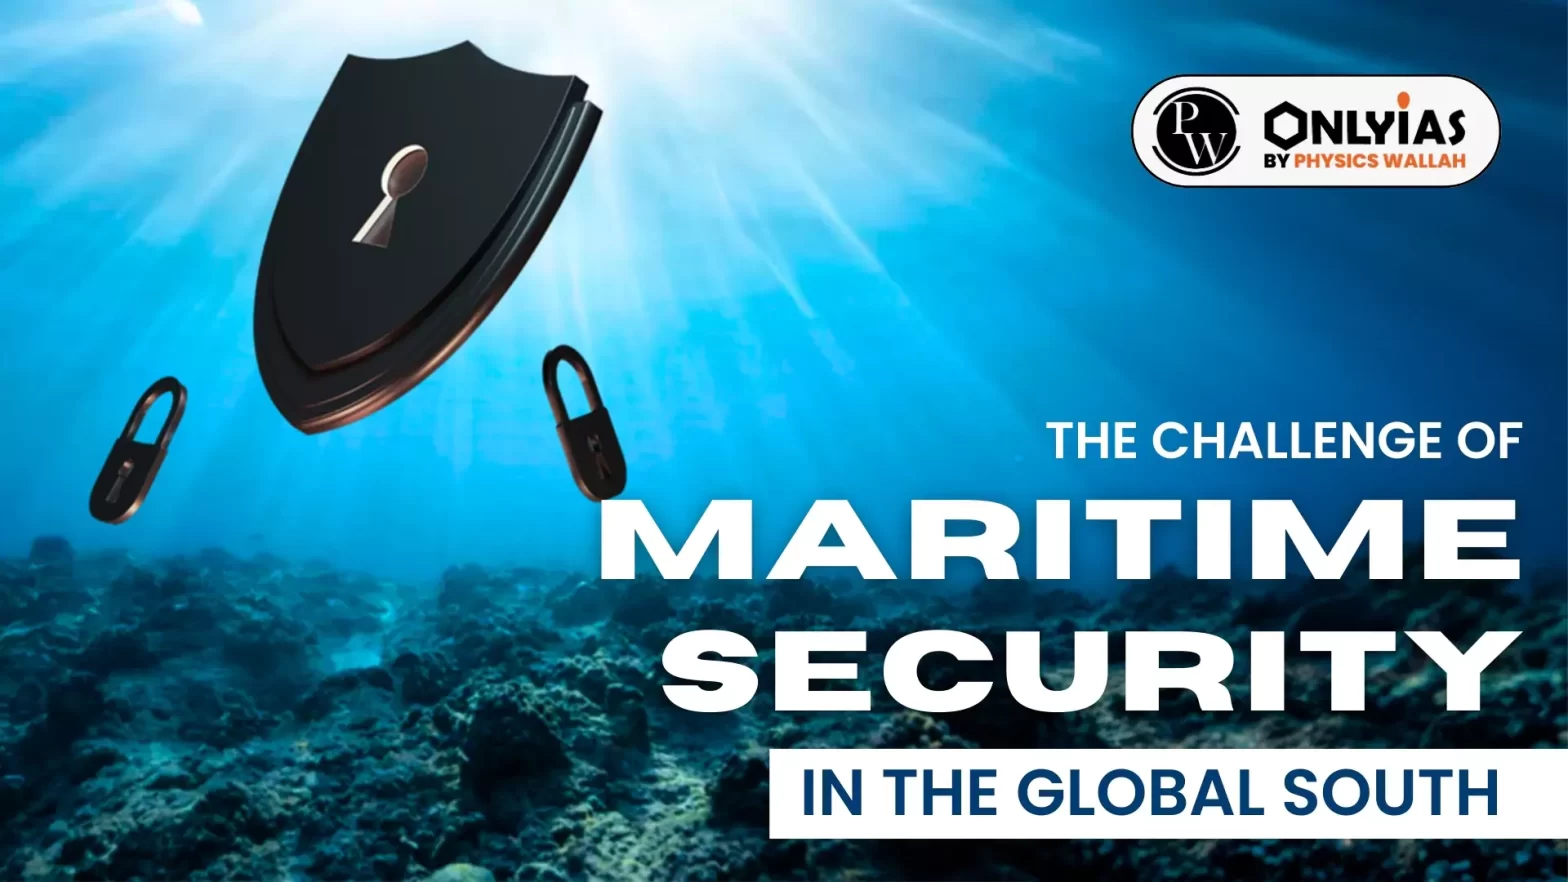 The Challenge of Maritime Security in the Global South